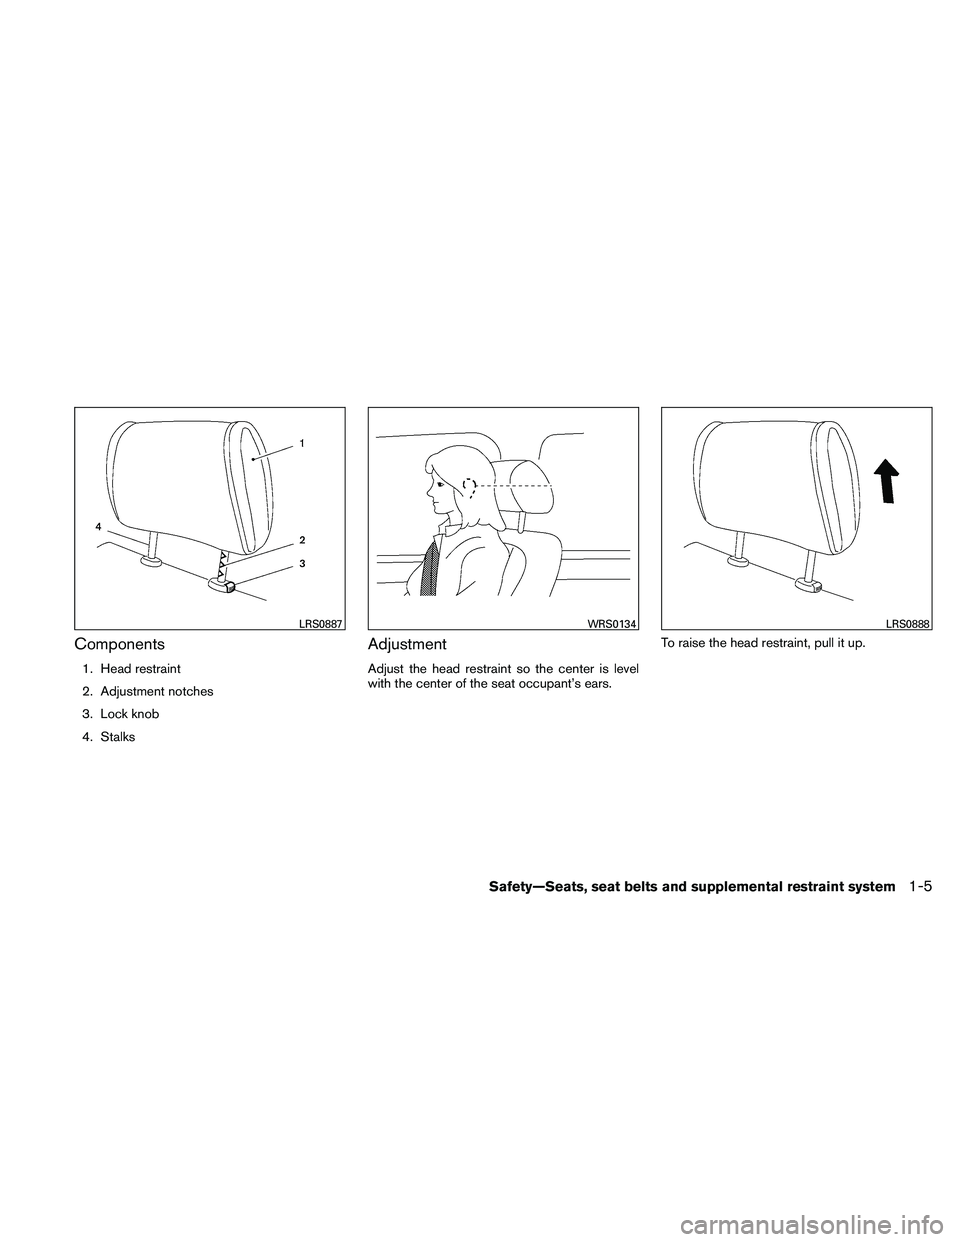 NISSAN XTERRA 2010  Owner´s Manual Components
1. Head restraint
2. Adjustment notches
3. Lock knob
4. Stalks
Adjustment
Adjust the head restraint so the center is level
with the center of the seat occupant’s ears.To raise the head re